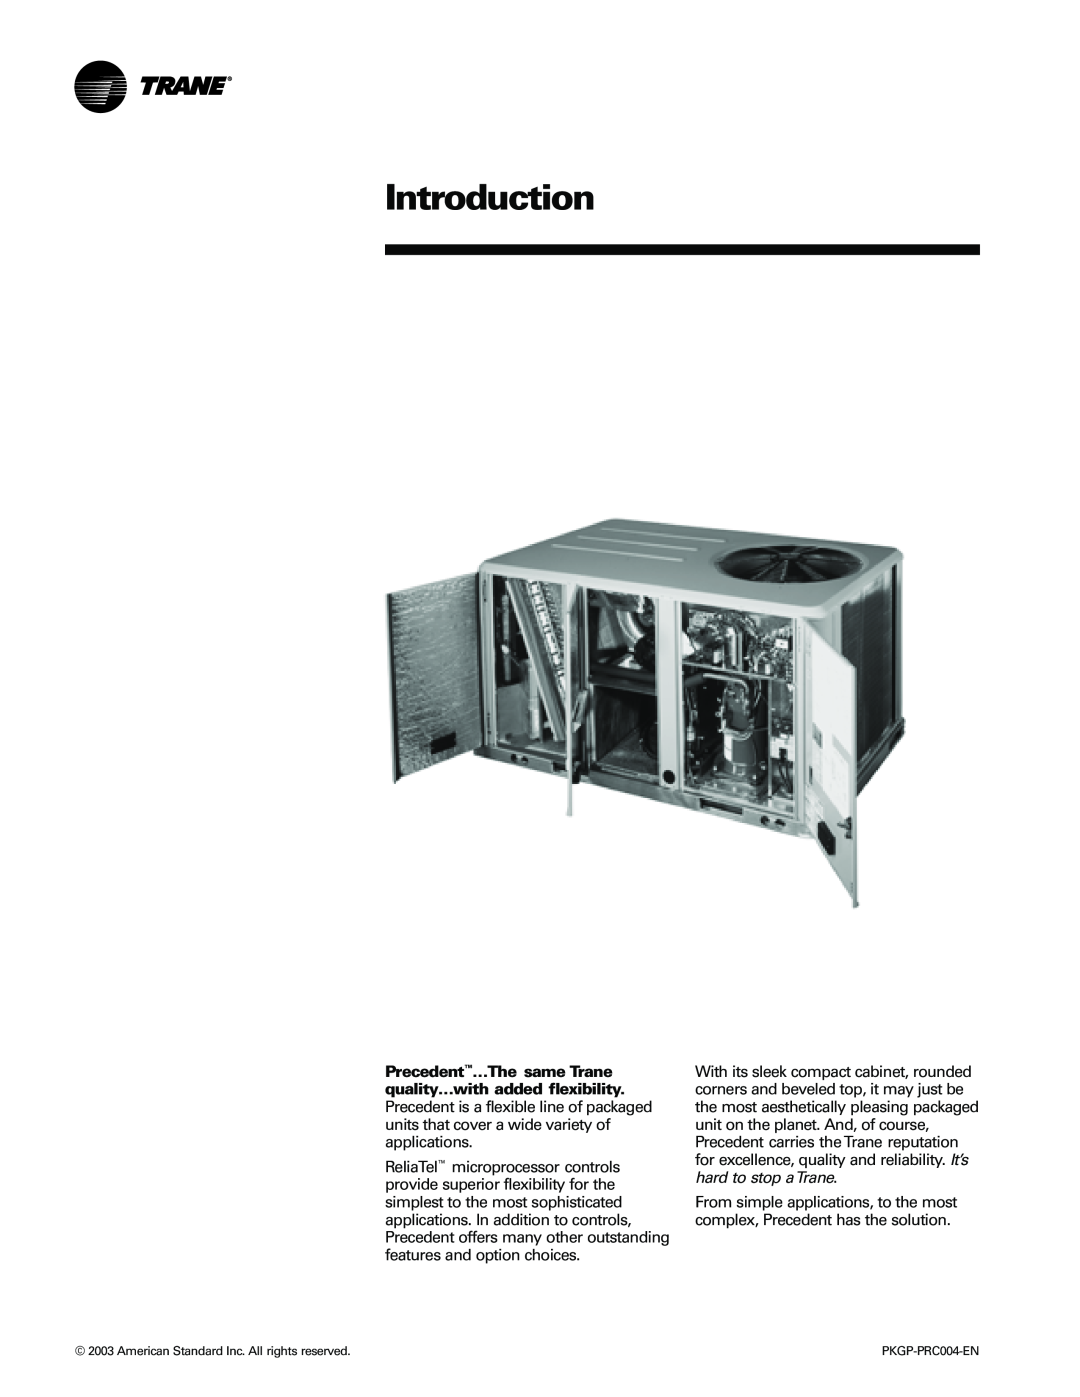 Trane WSC060-120 manual Introduction, American Standard Inc. All rights reserved 